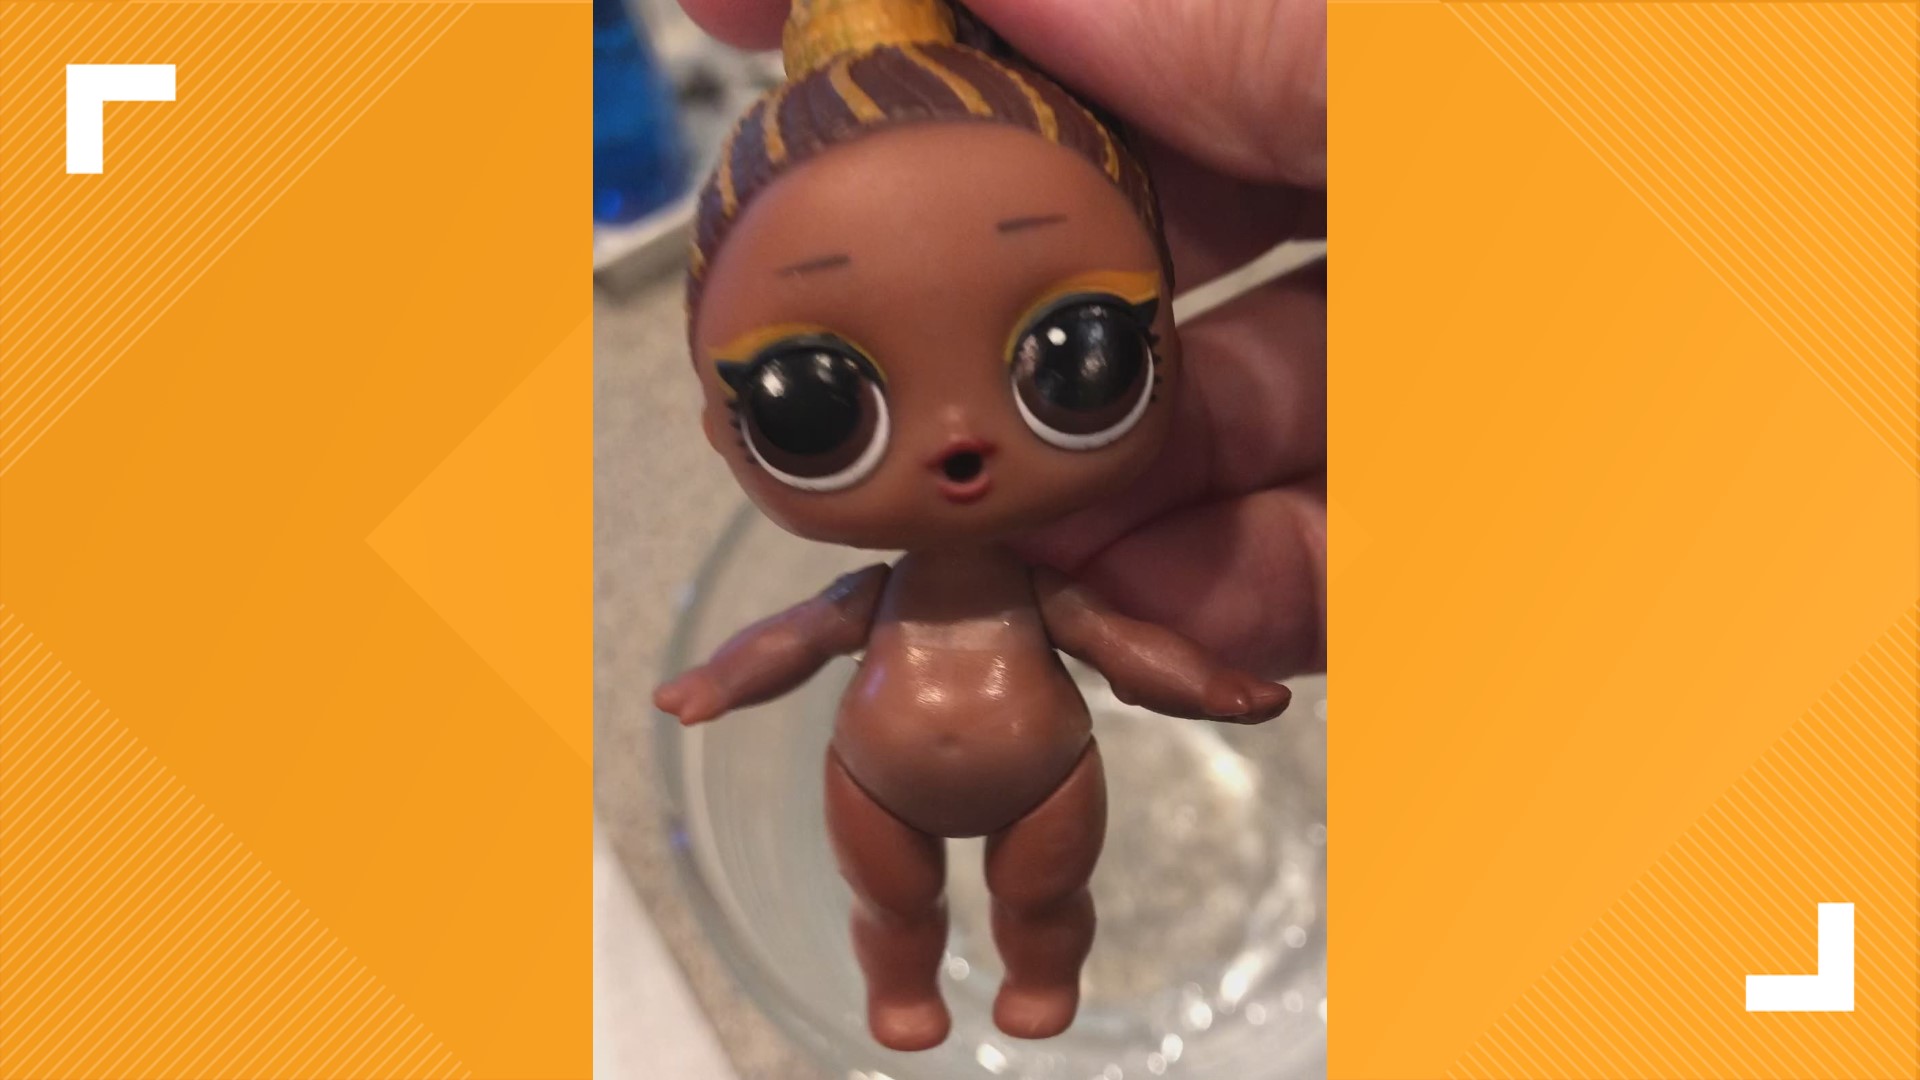 L.O.L. Surprise! dolls cause panic as parents discover inappropriate